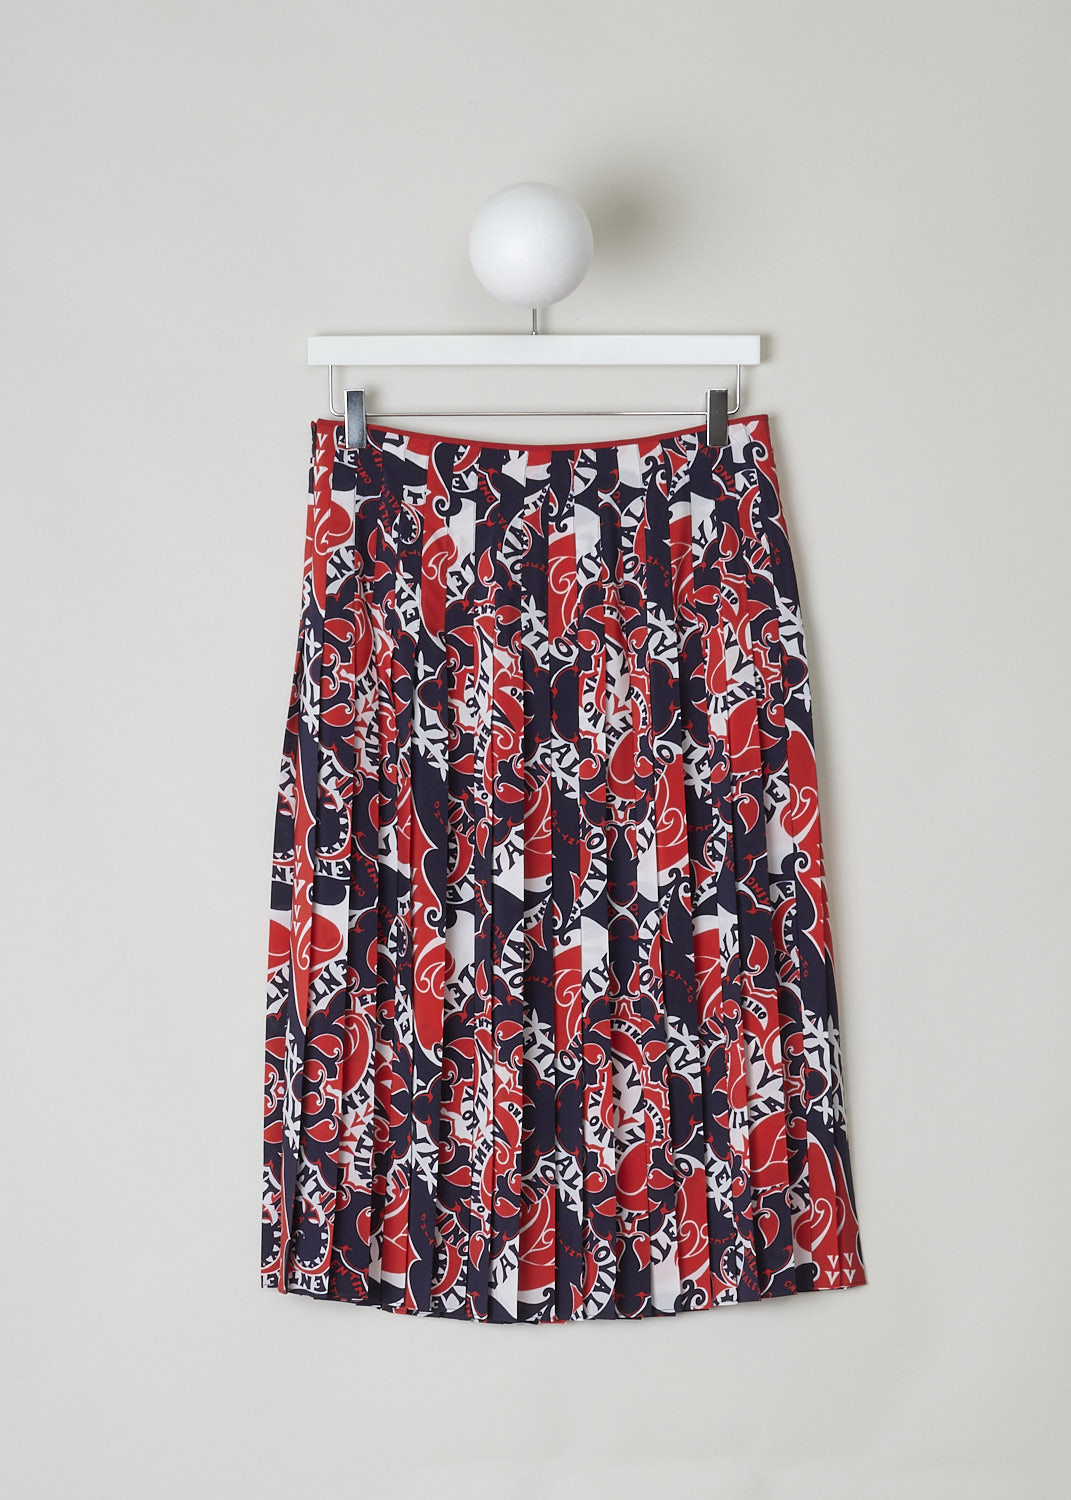 VALENTINO, BOLD PRINTED PLEATED SKIRT WITH GOLDEN V, 1B3RA8Y57AP_01N, Print, Blue, Red, Back, This bold printed midi skirt has the brand's signature gold-toned V-logo on the waistline. The skirt is fully pleated. The closure option on this skirt is a concealed zipper in the side seam.
